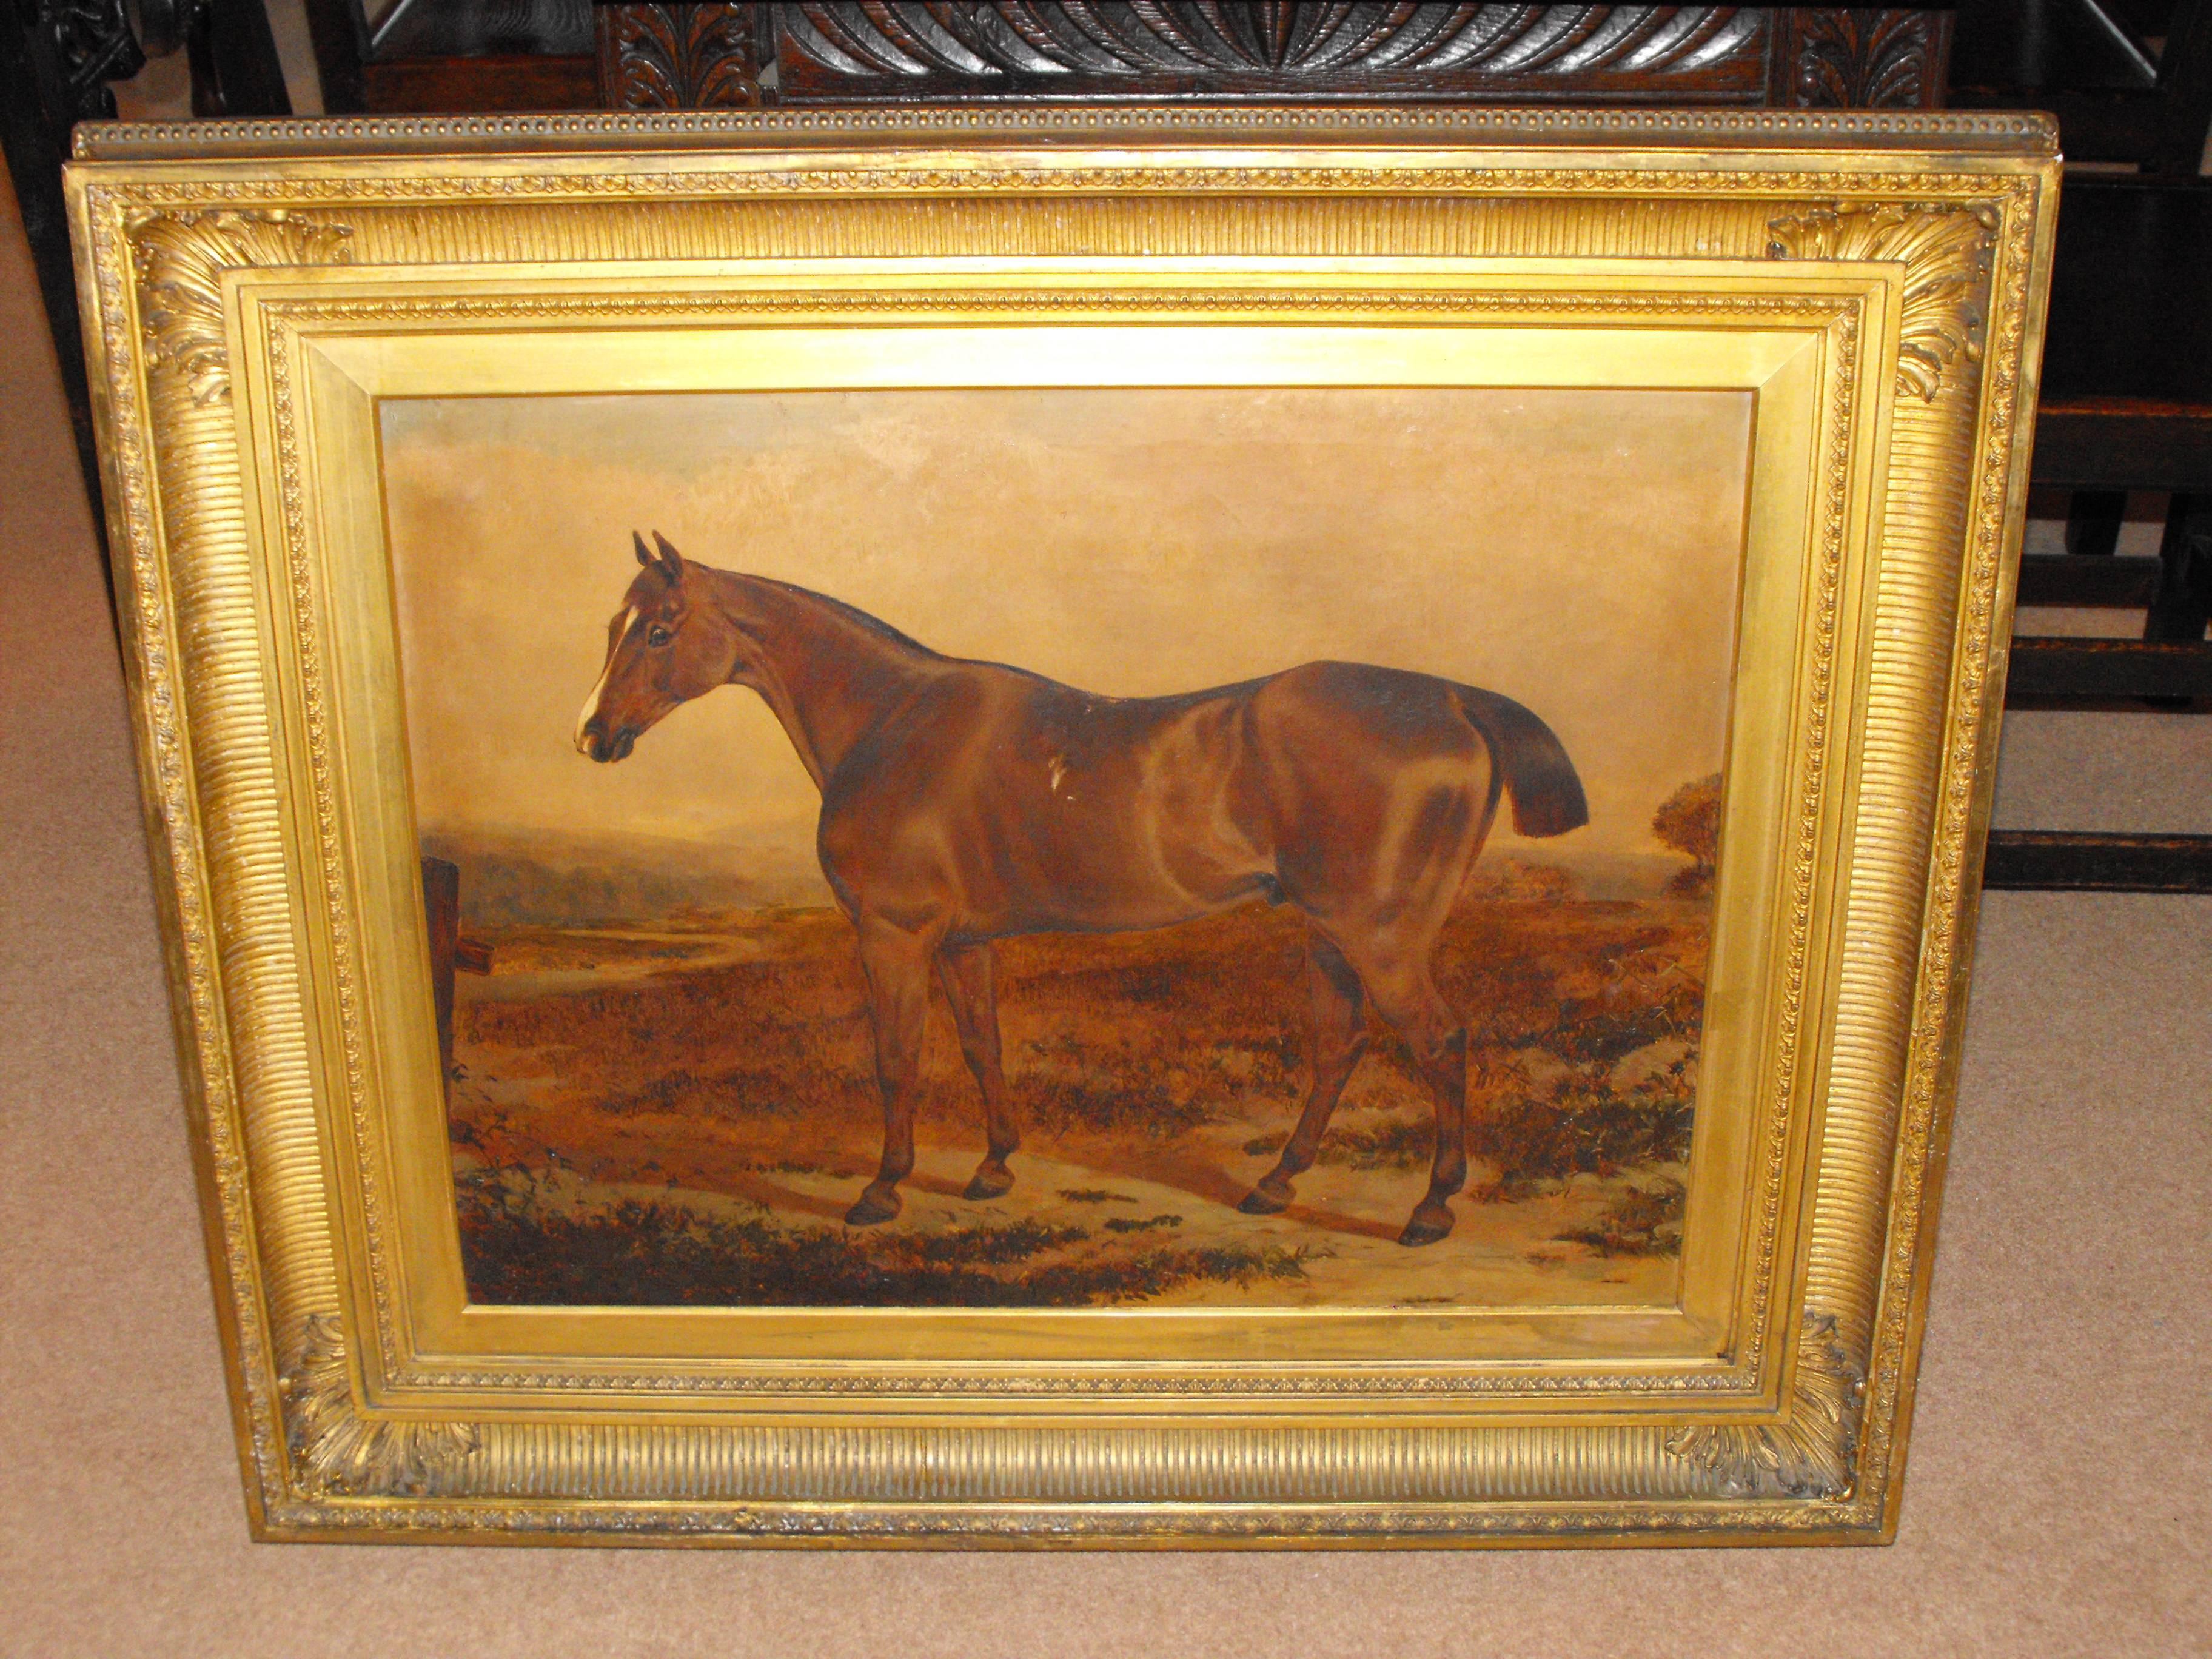 A fine example of a good quality impressive Victorian 19th century portrait antique oil painting on canvas of a prize hunting horse believed to be in the manner and style or follower of Herring Circa 1870 . We believe that the frame and canvas have